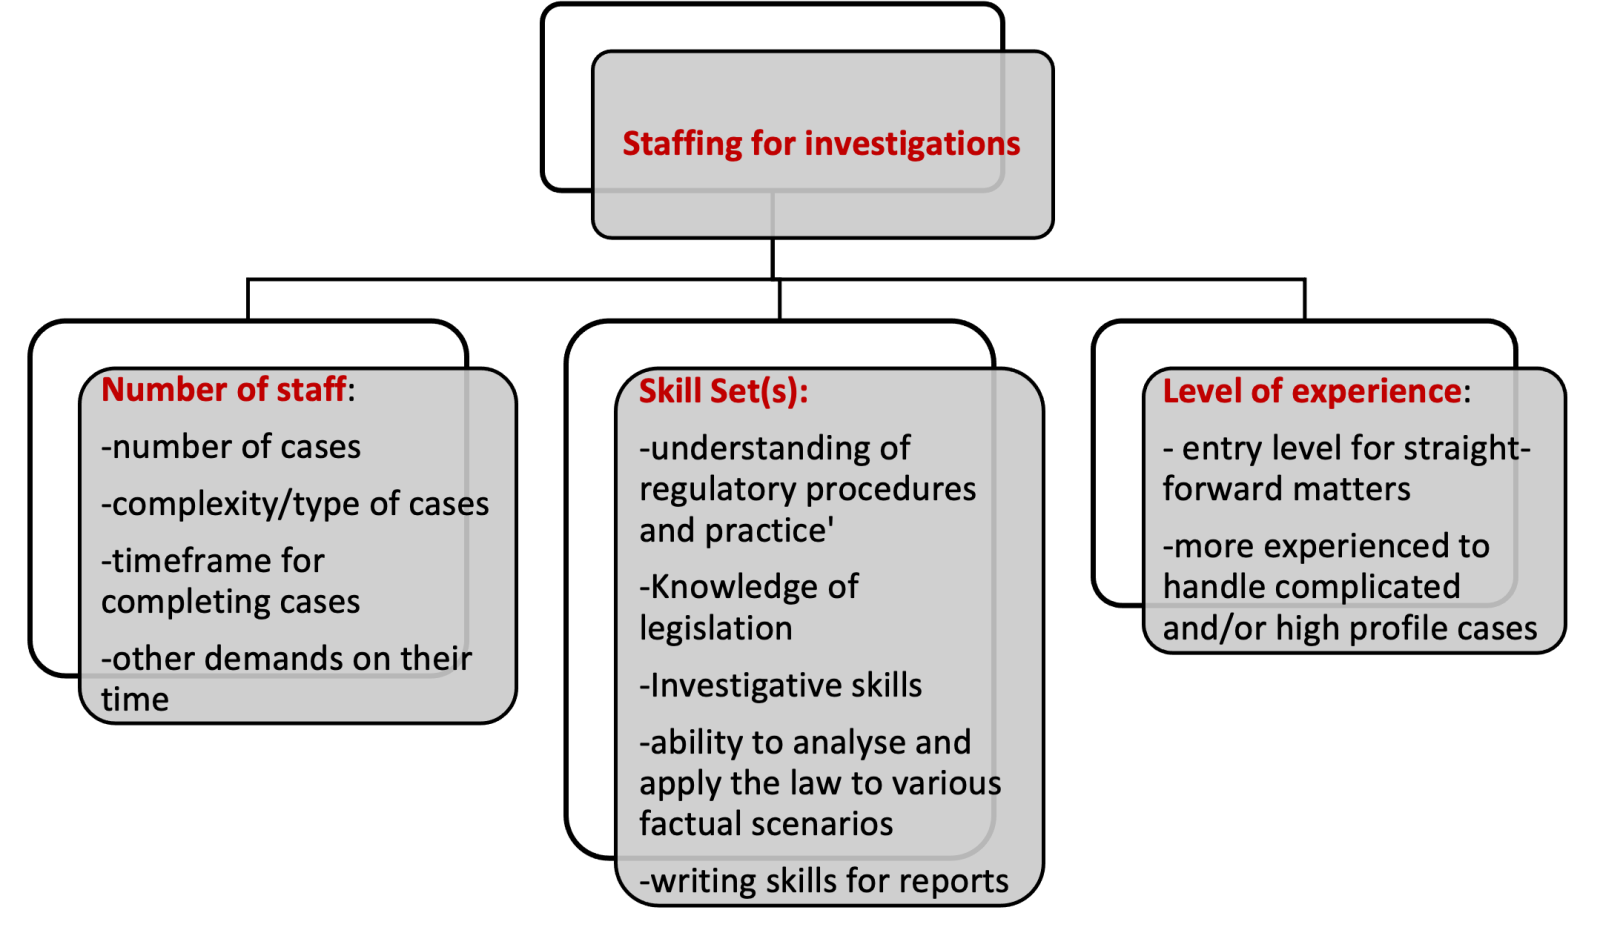 Staffing for investigations